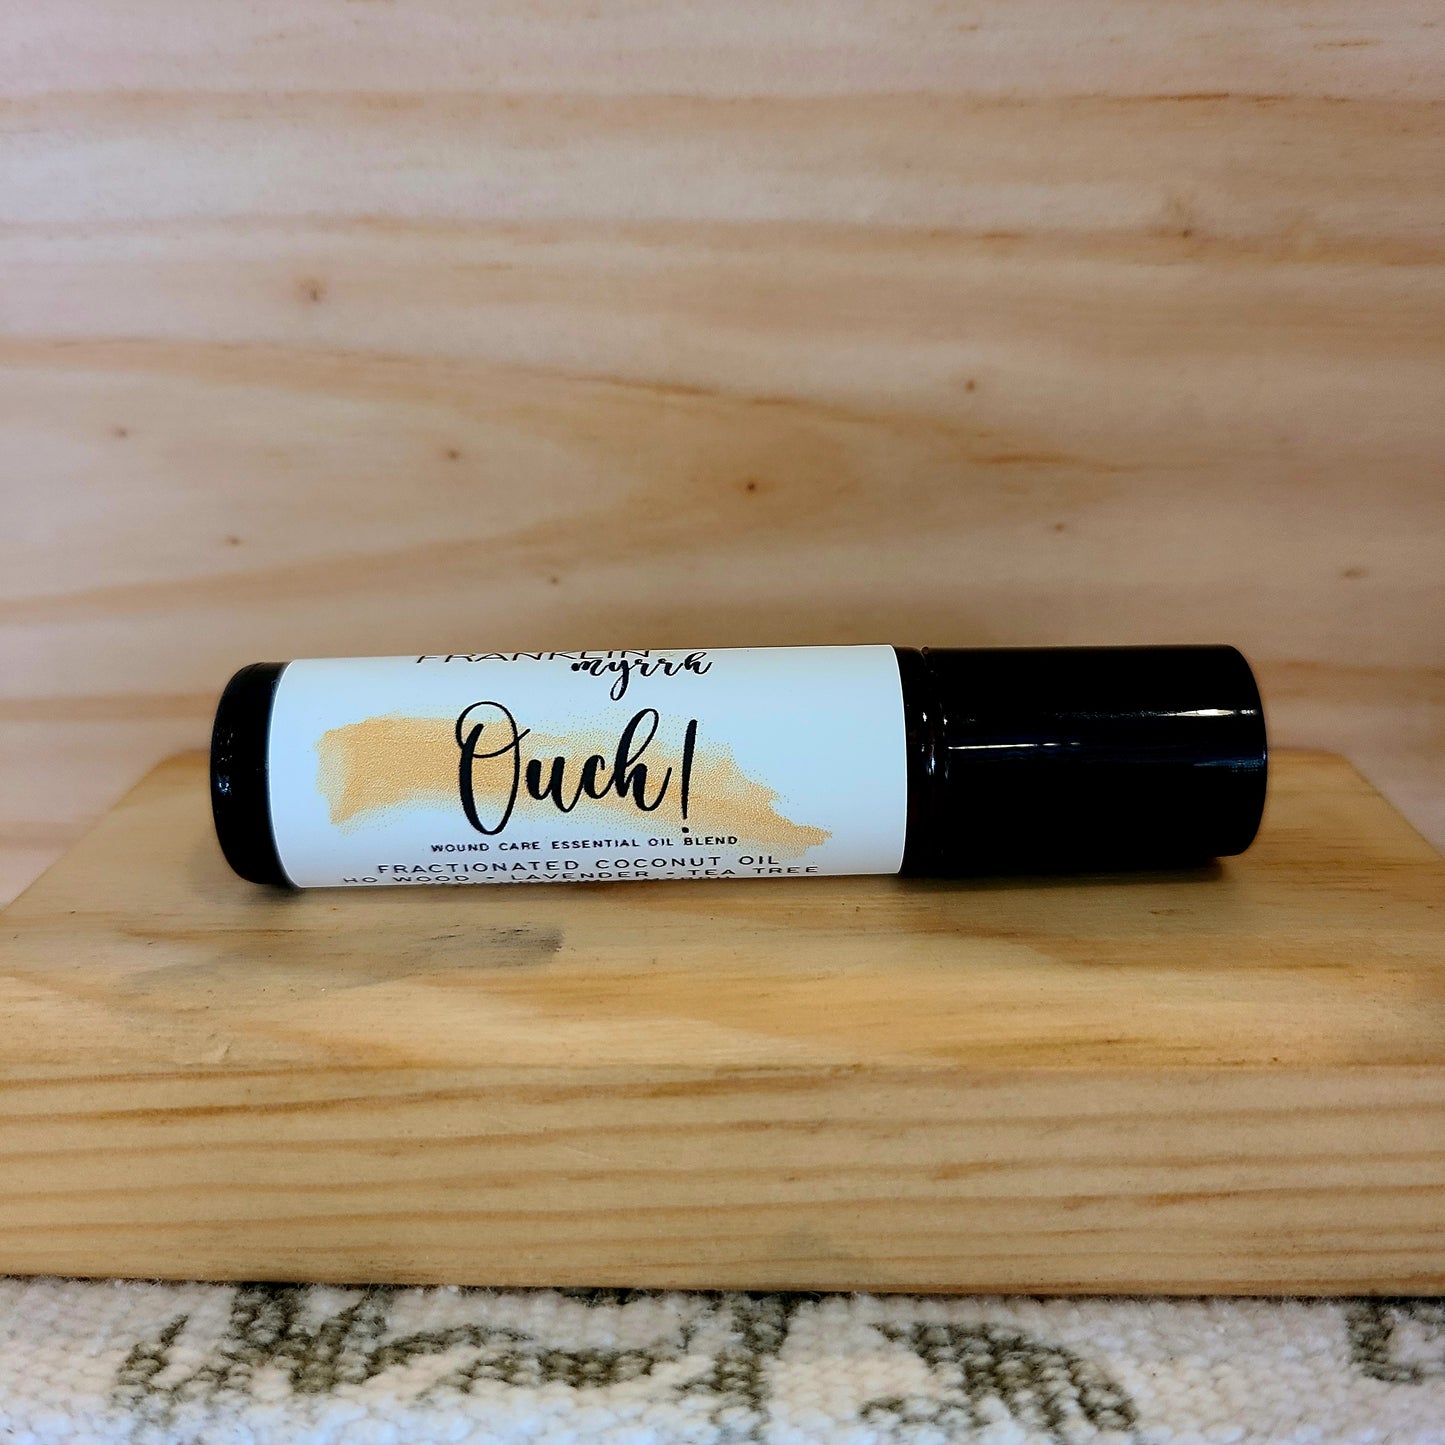 OUCH! Wound Care Essential Oil Blend Roller